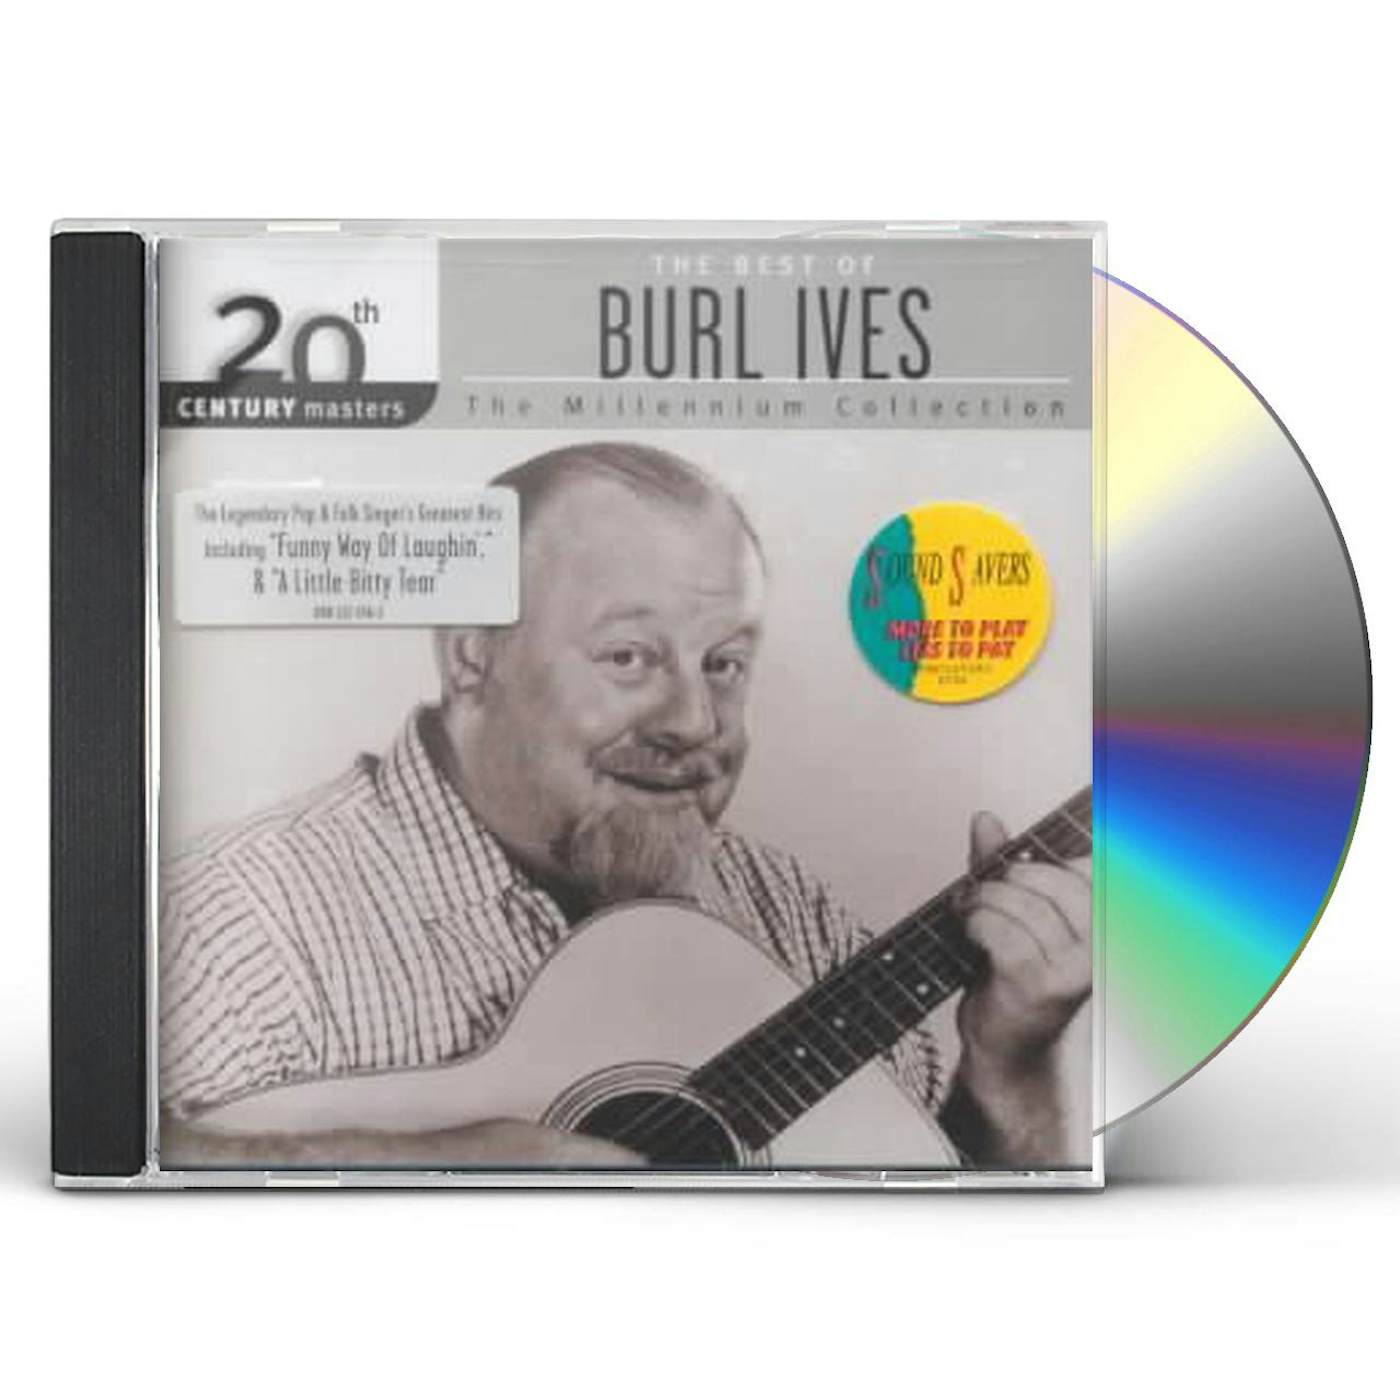 Burl Ives 20TH CENTURY MASTERS: MILLENNIUM COLLECTION CD